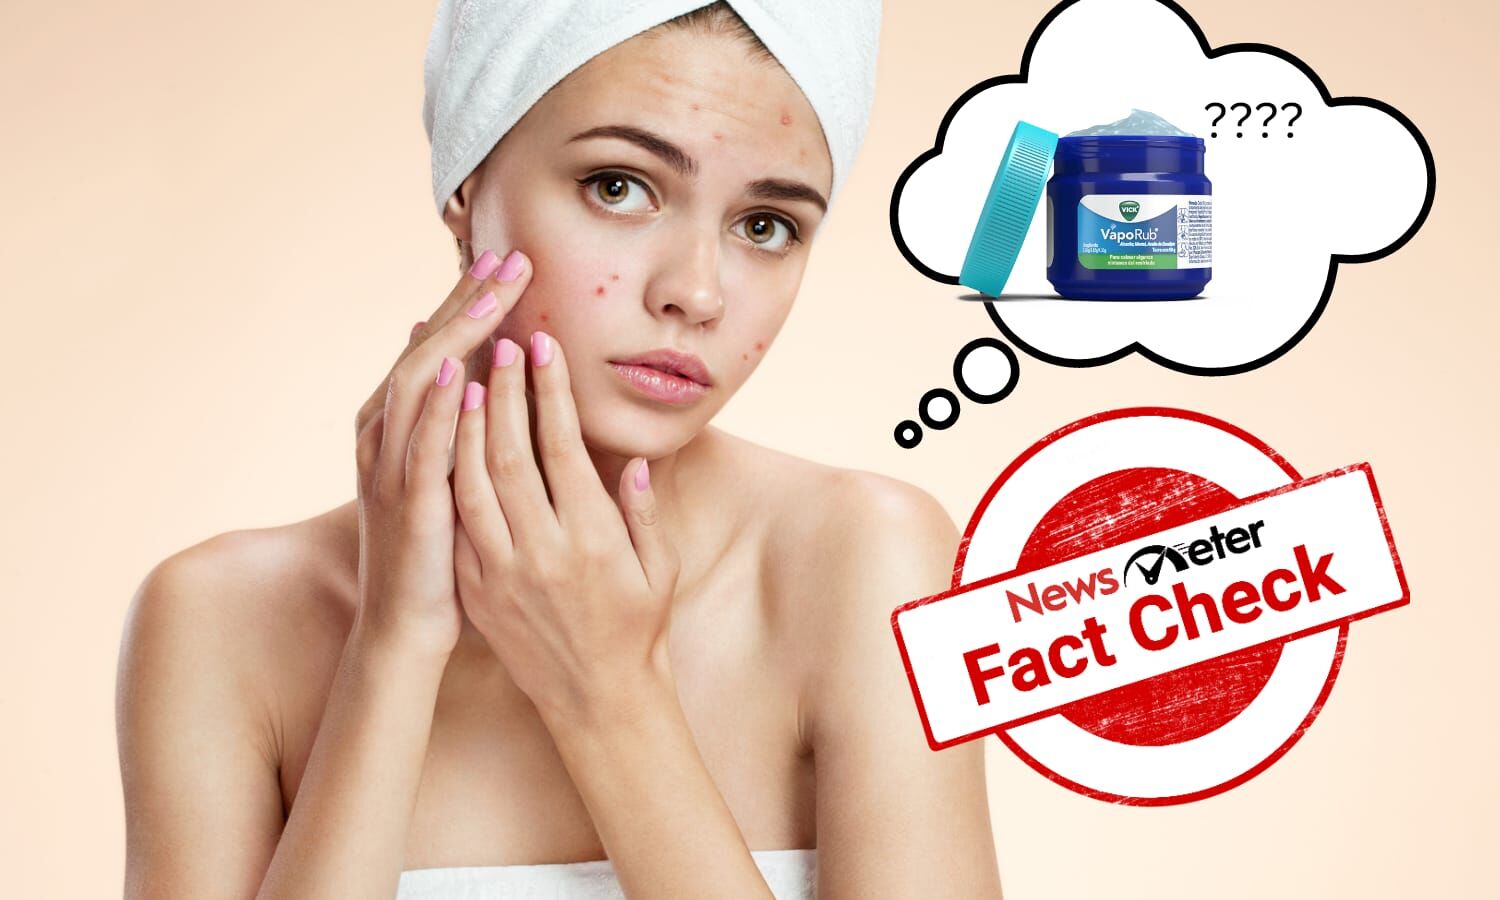 Vicks for Acne: Does It Work?